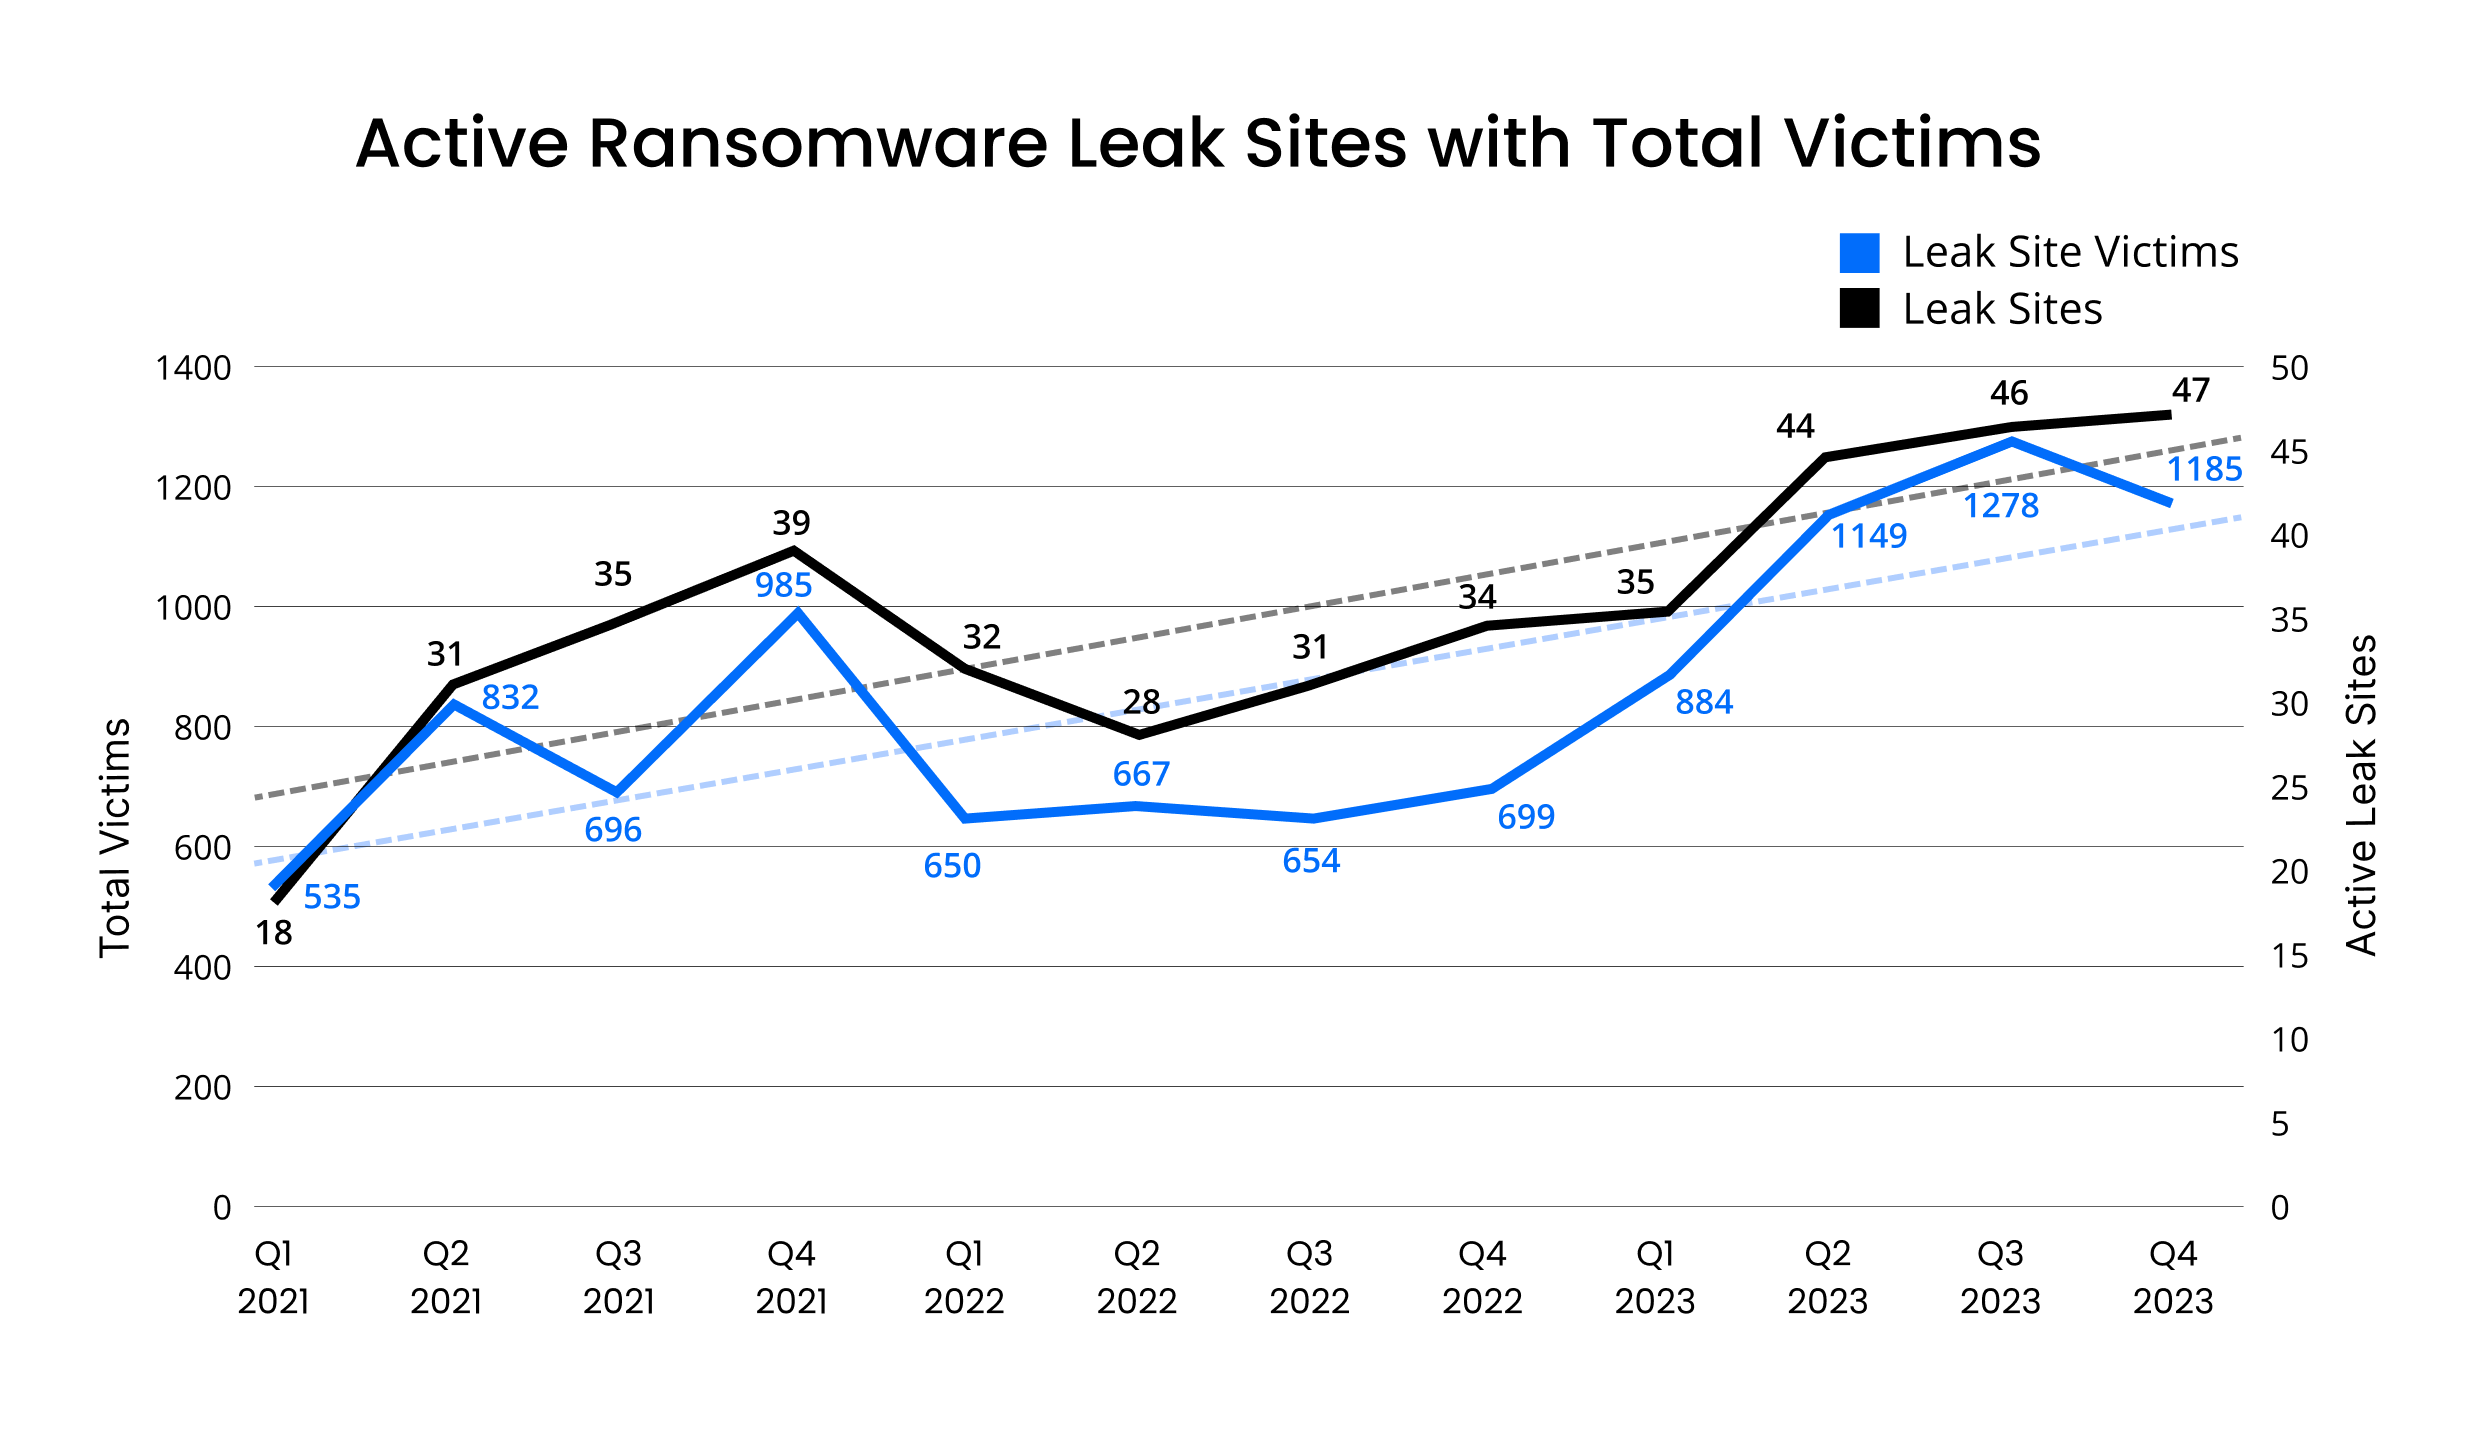 [LINE GRAPH] Active ransomware sties with total victim numbers from Q1 2021 to Q4 2023